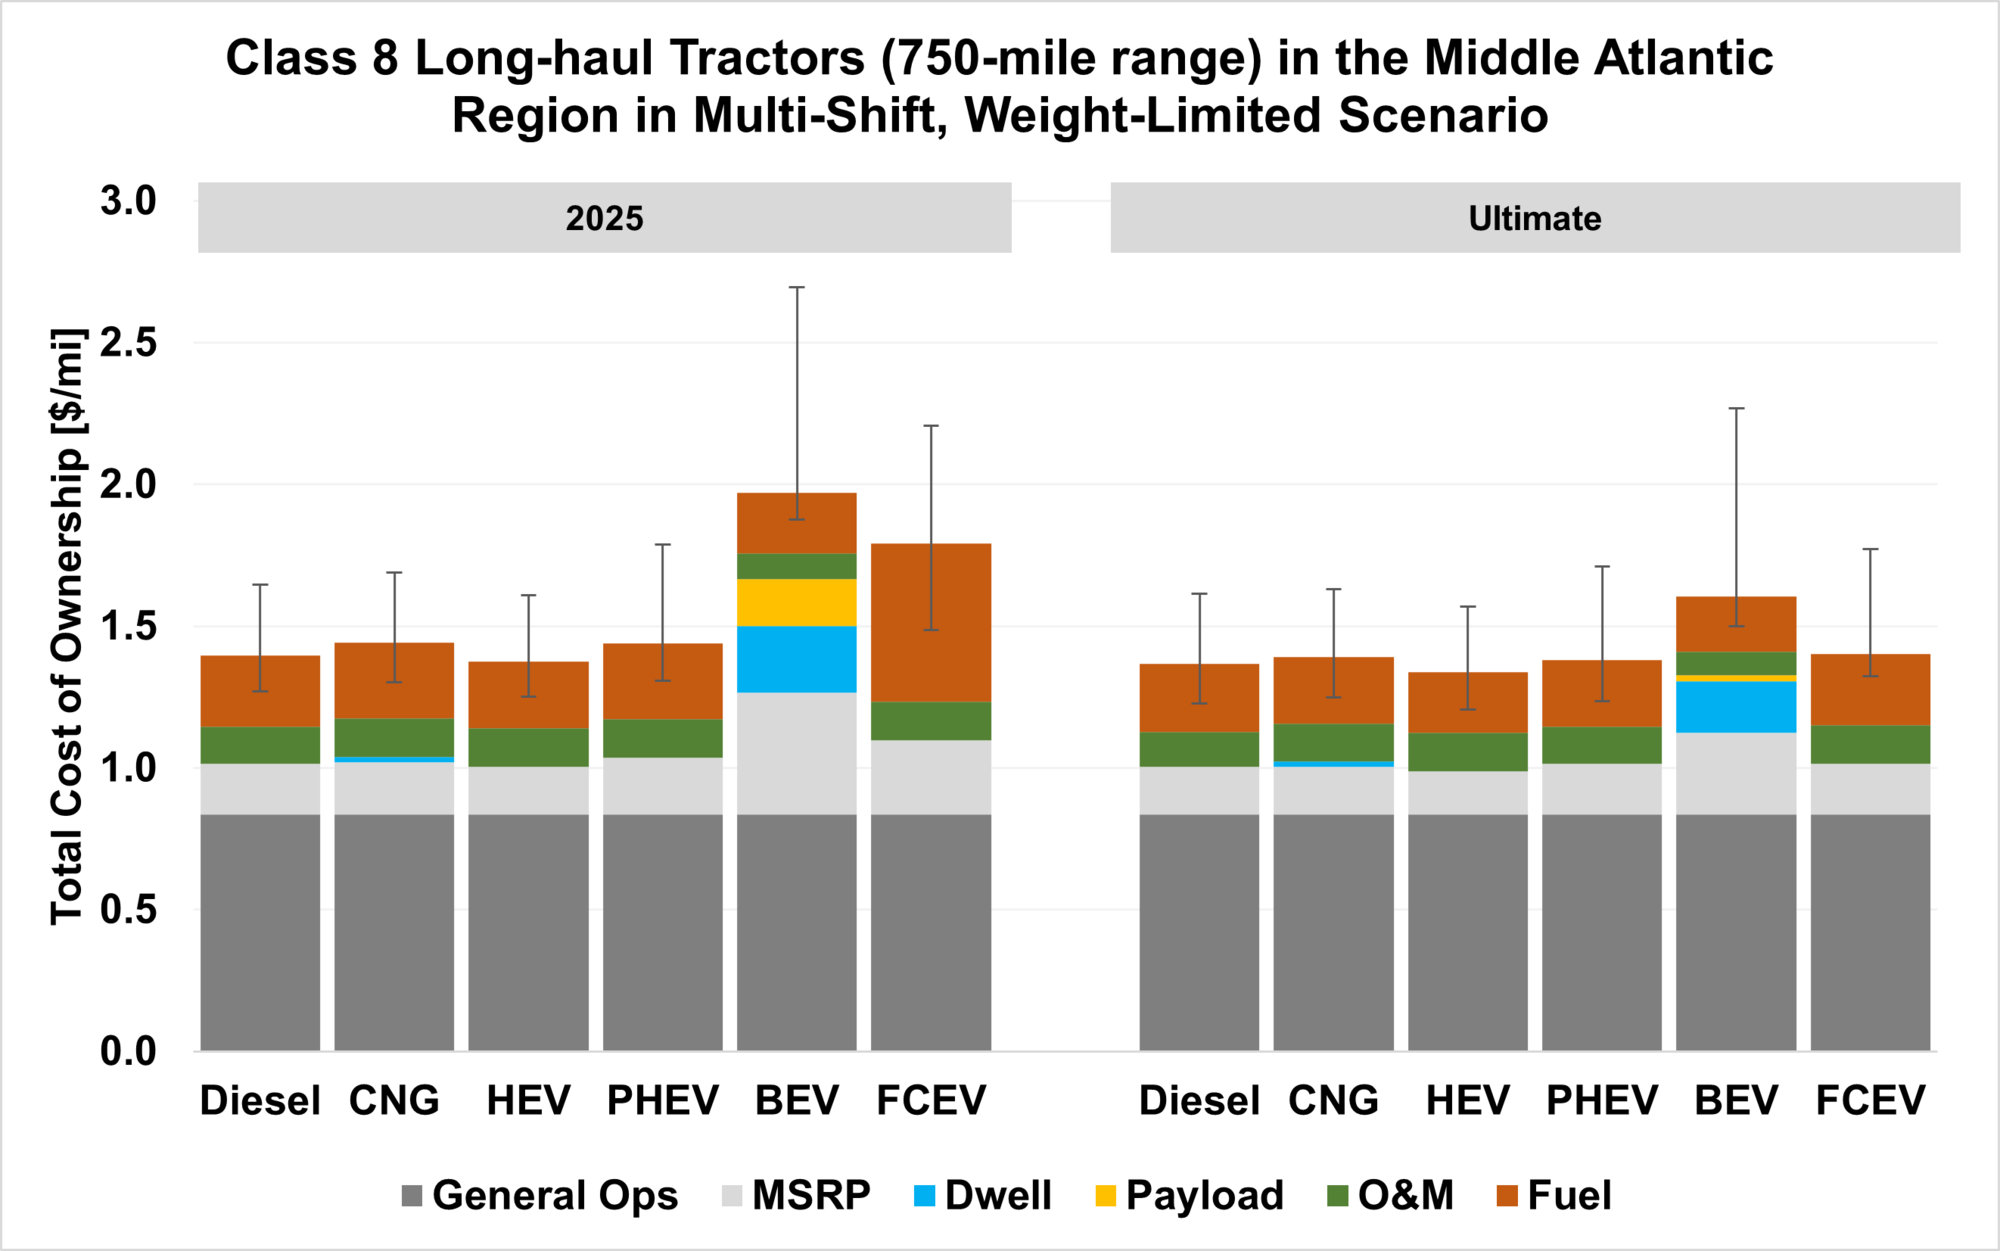 Class 8 Long-haul Tractors (750-mile range) in the Middle Atlantic Region in Multi-Shift, Weight-Limited Scenario